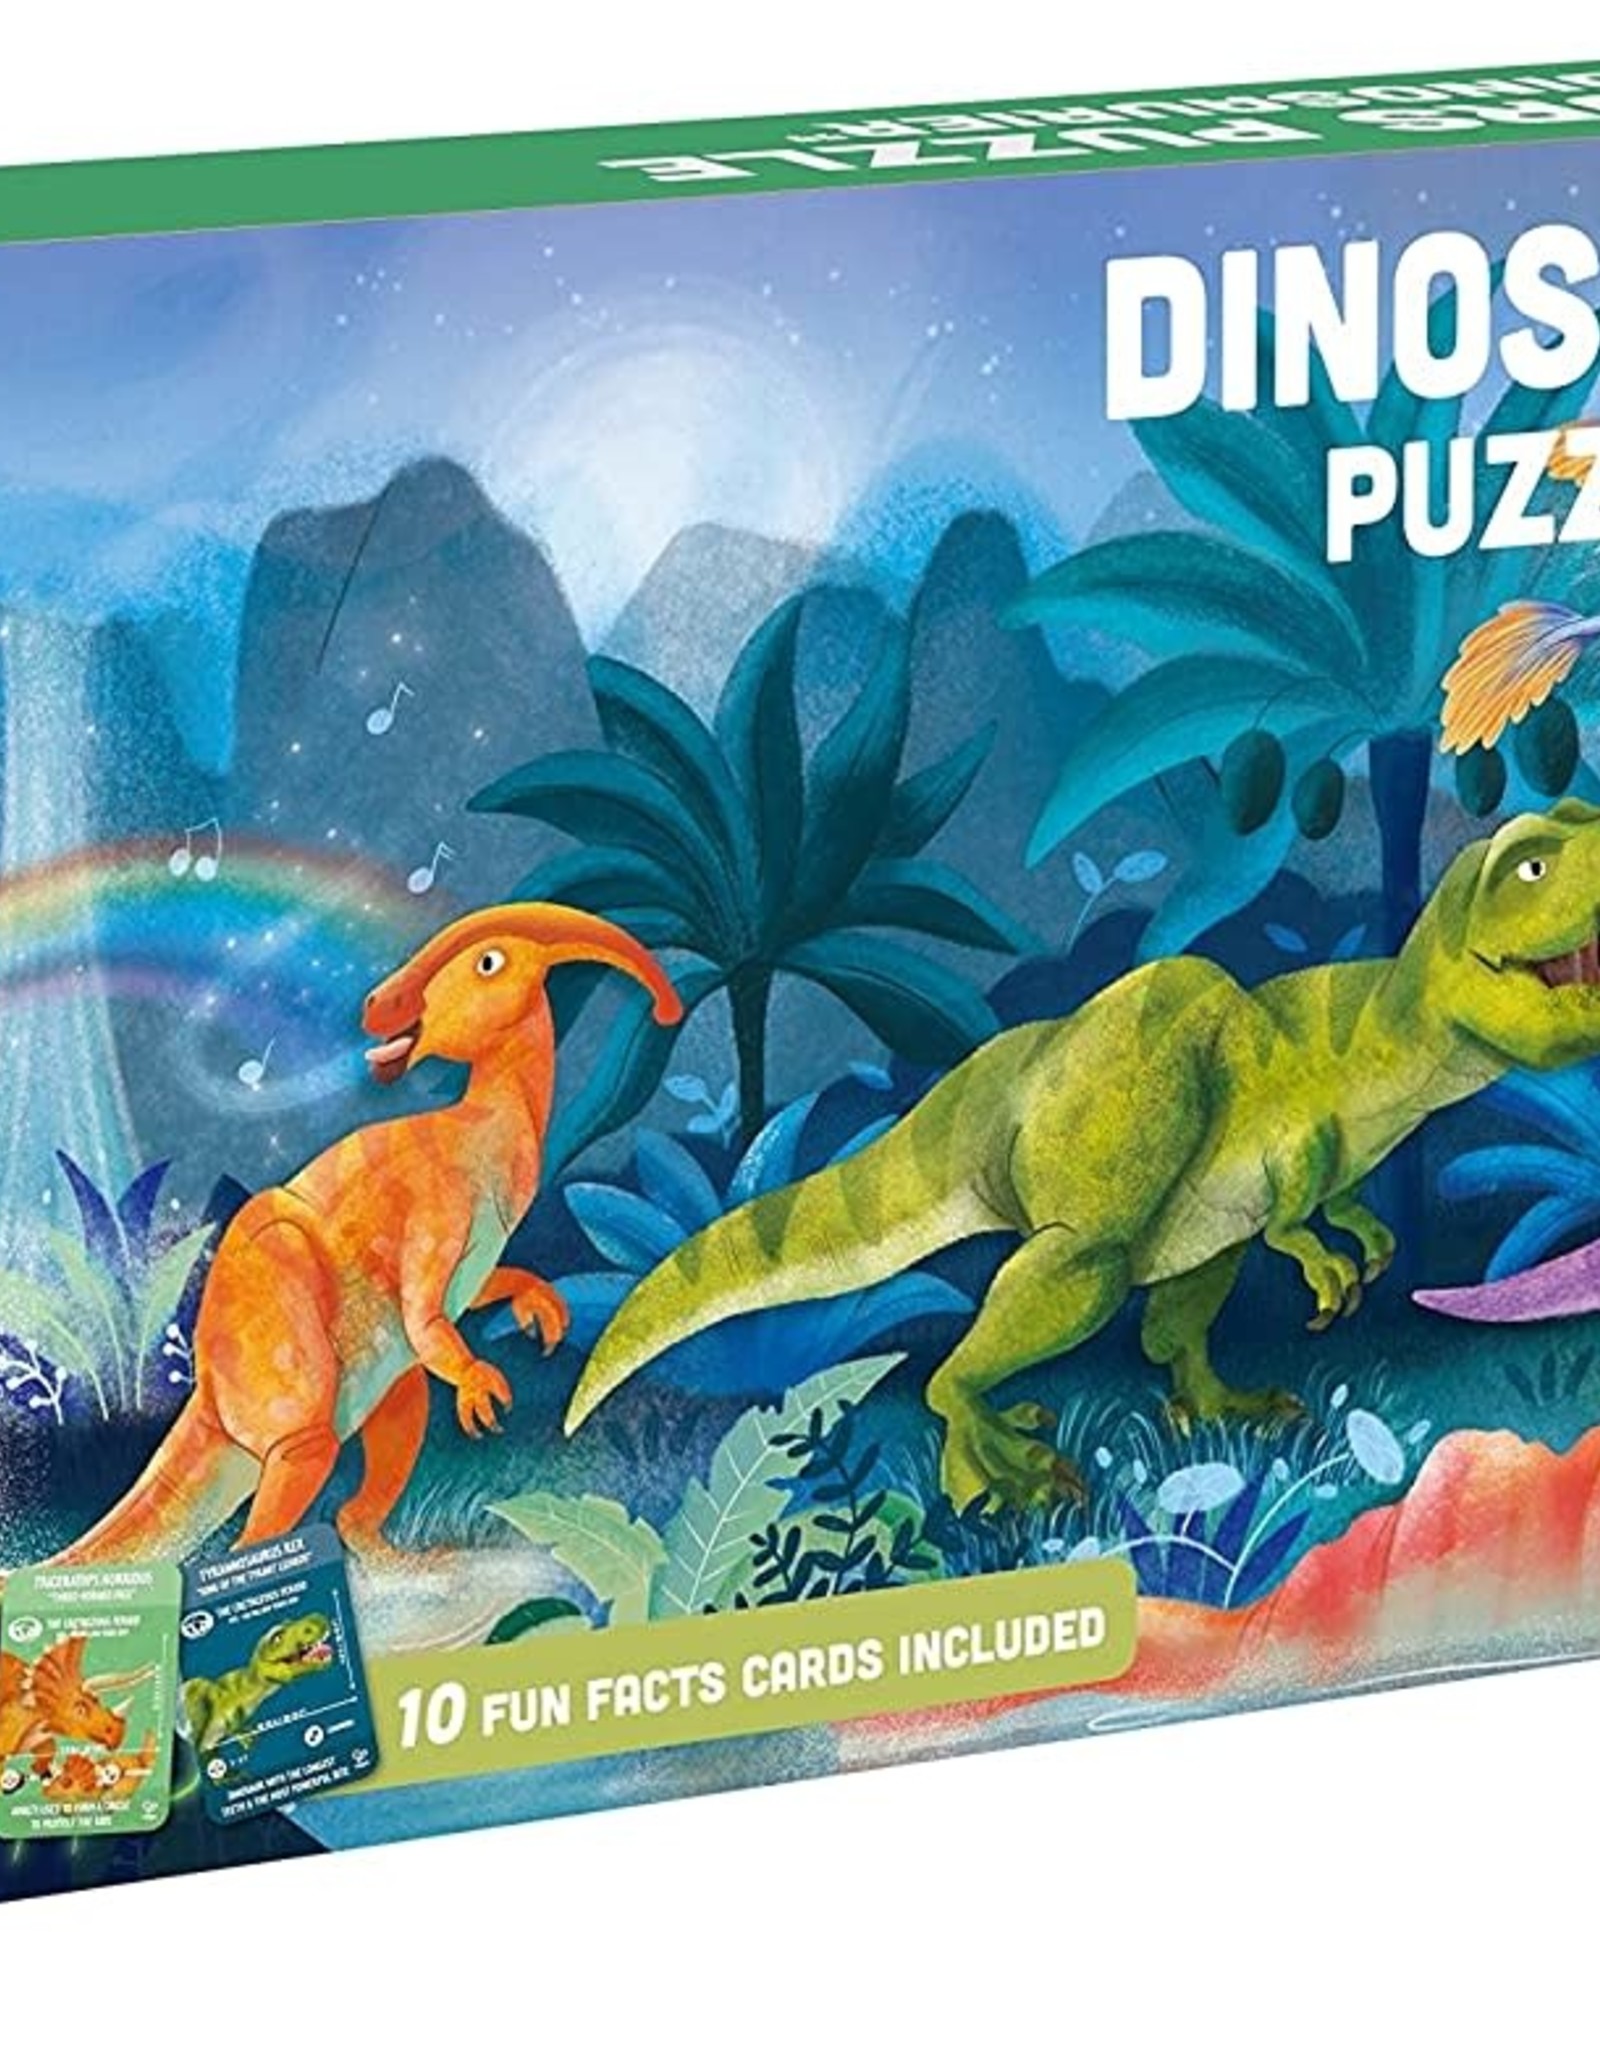 Dinosaurs Puzzle - Glow in the Dark 200pc